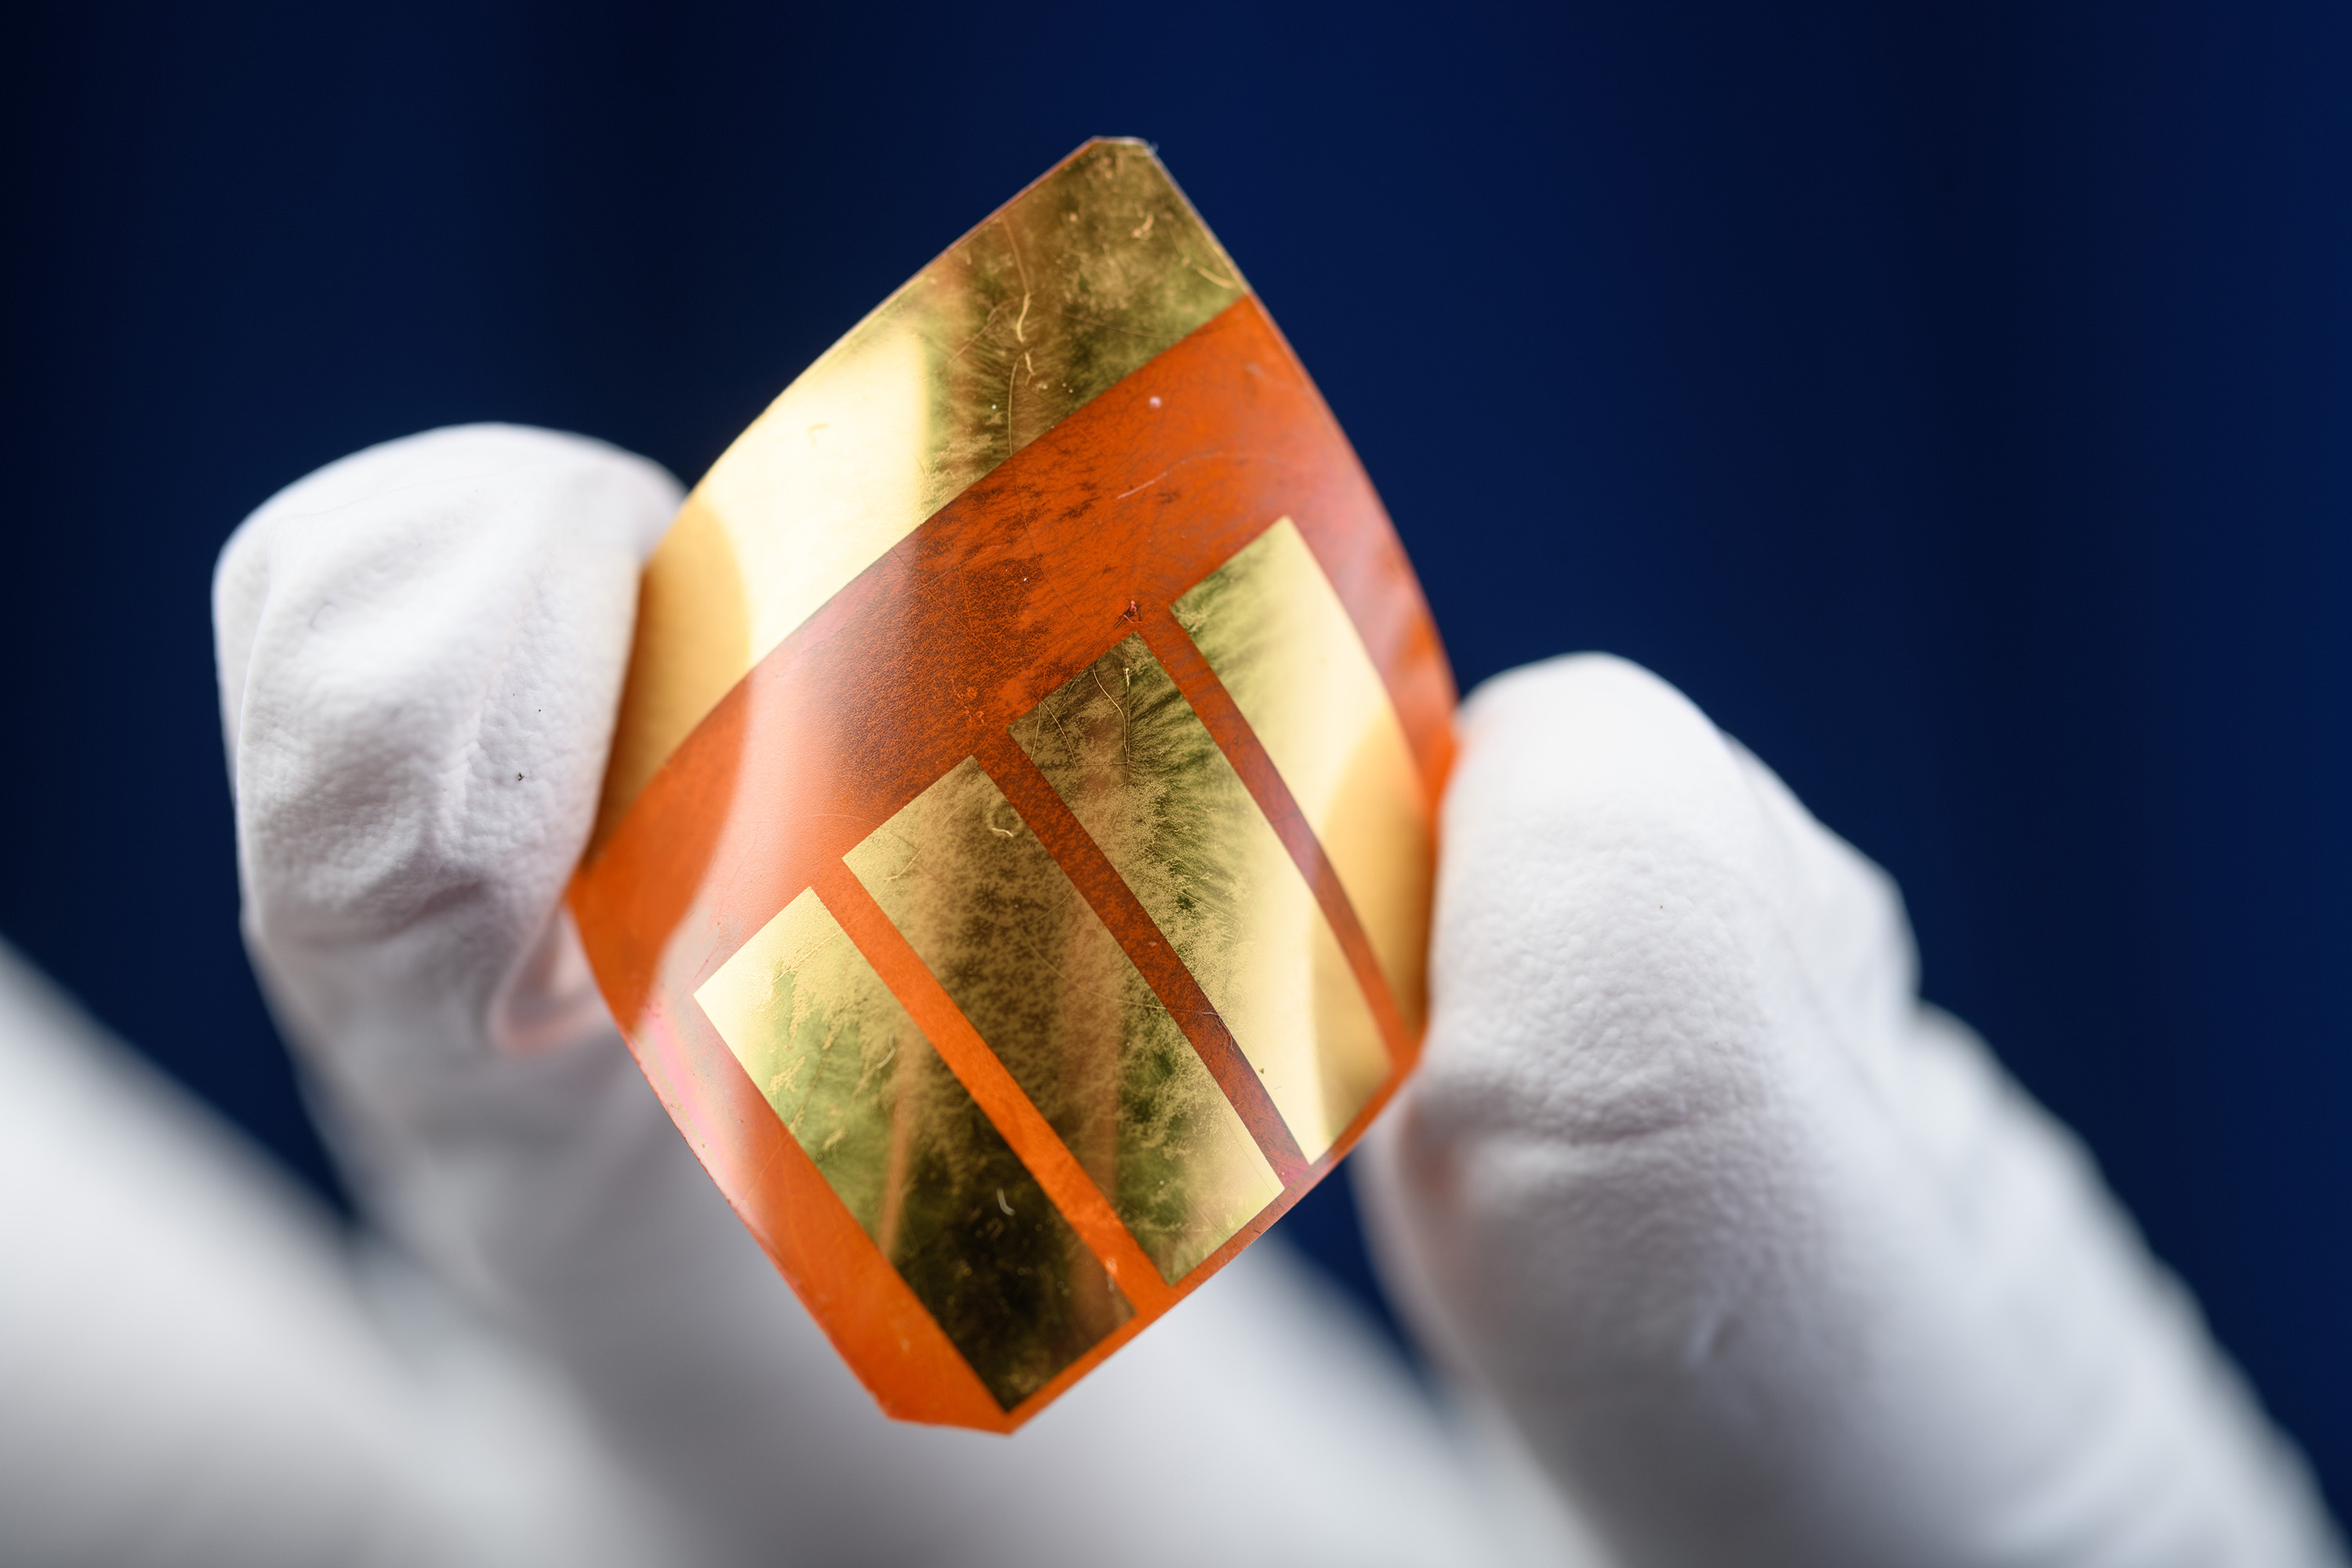 Advanced manufacturing and materials are among the priorities for the South Big Data Innovation Hub. This image shows a perovskite photovoltaic material. (Credit: Rob Felt, Georgia Tech)